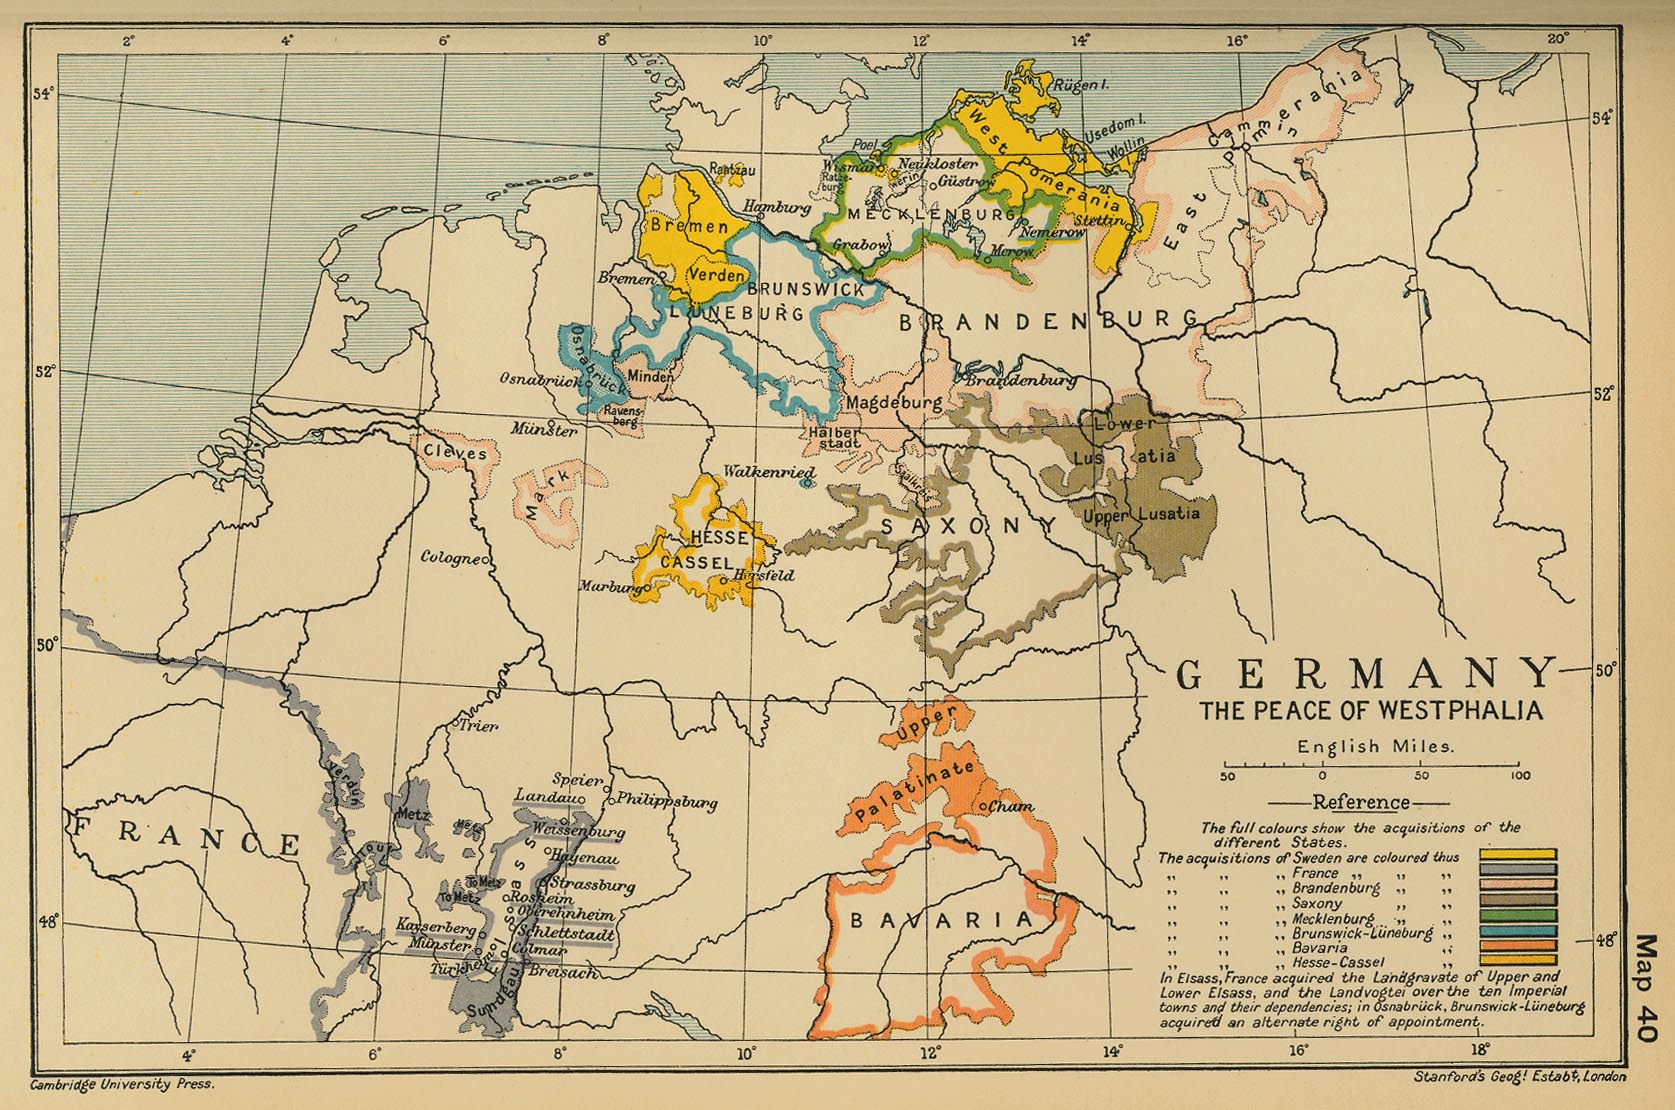 Map of Germany 1648 - The Peace of Westphalia